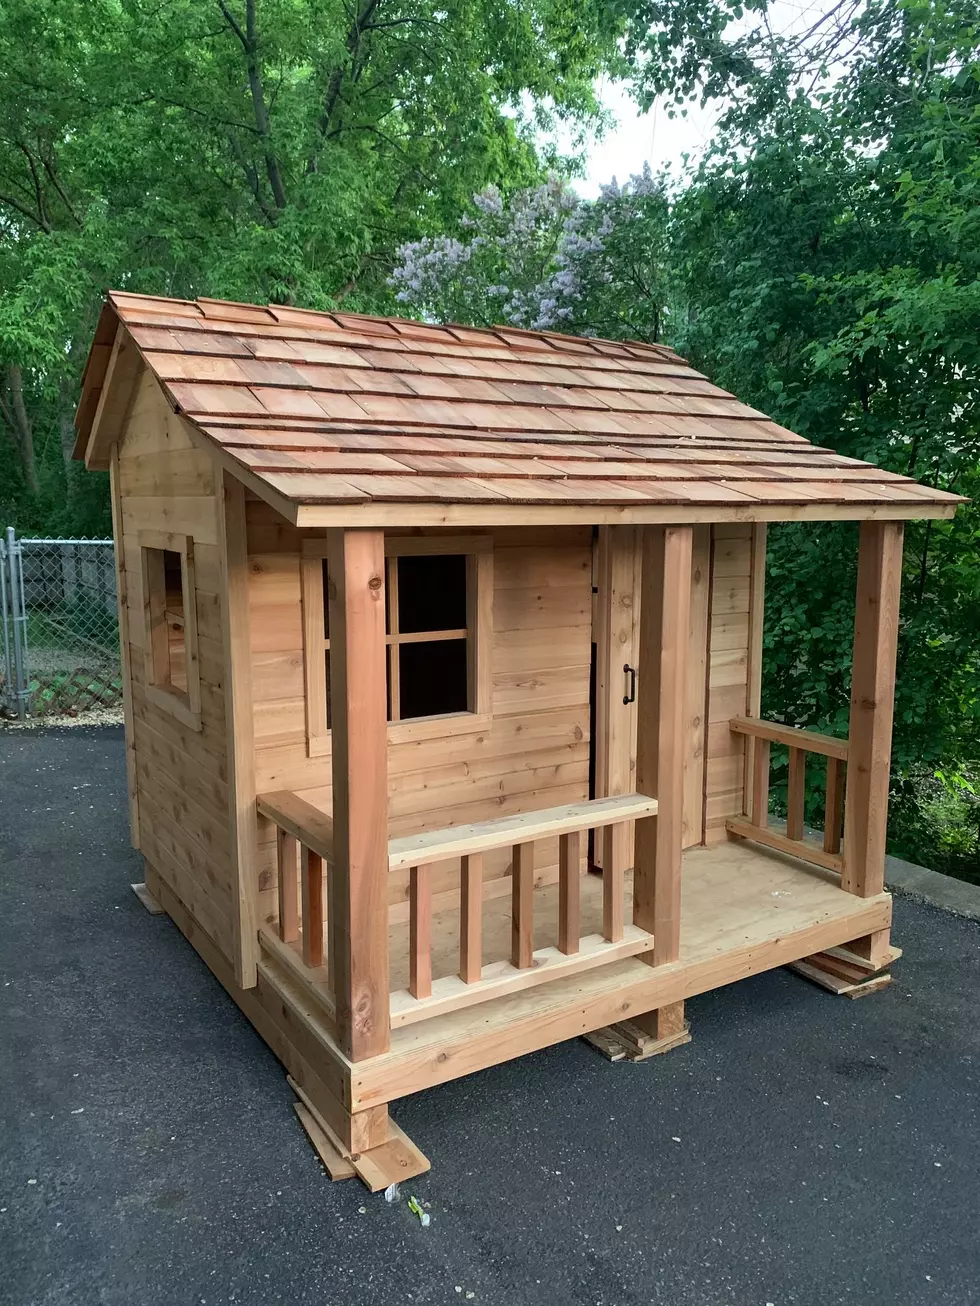 South Students Craft Amazing Playhouse, For Sale